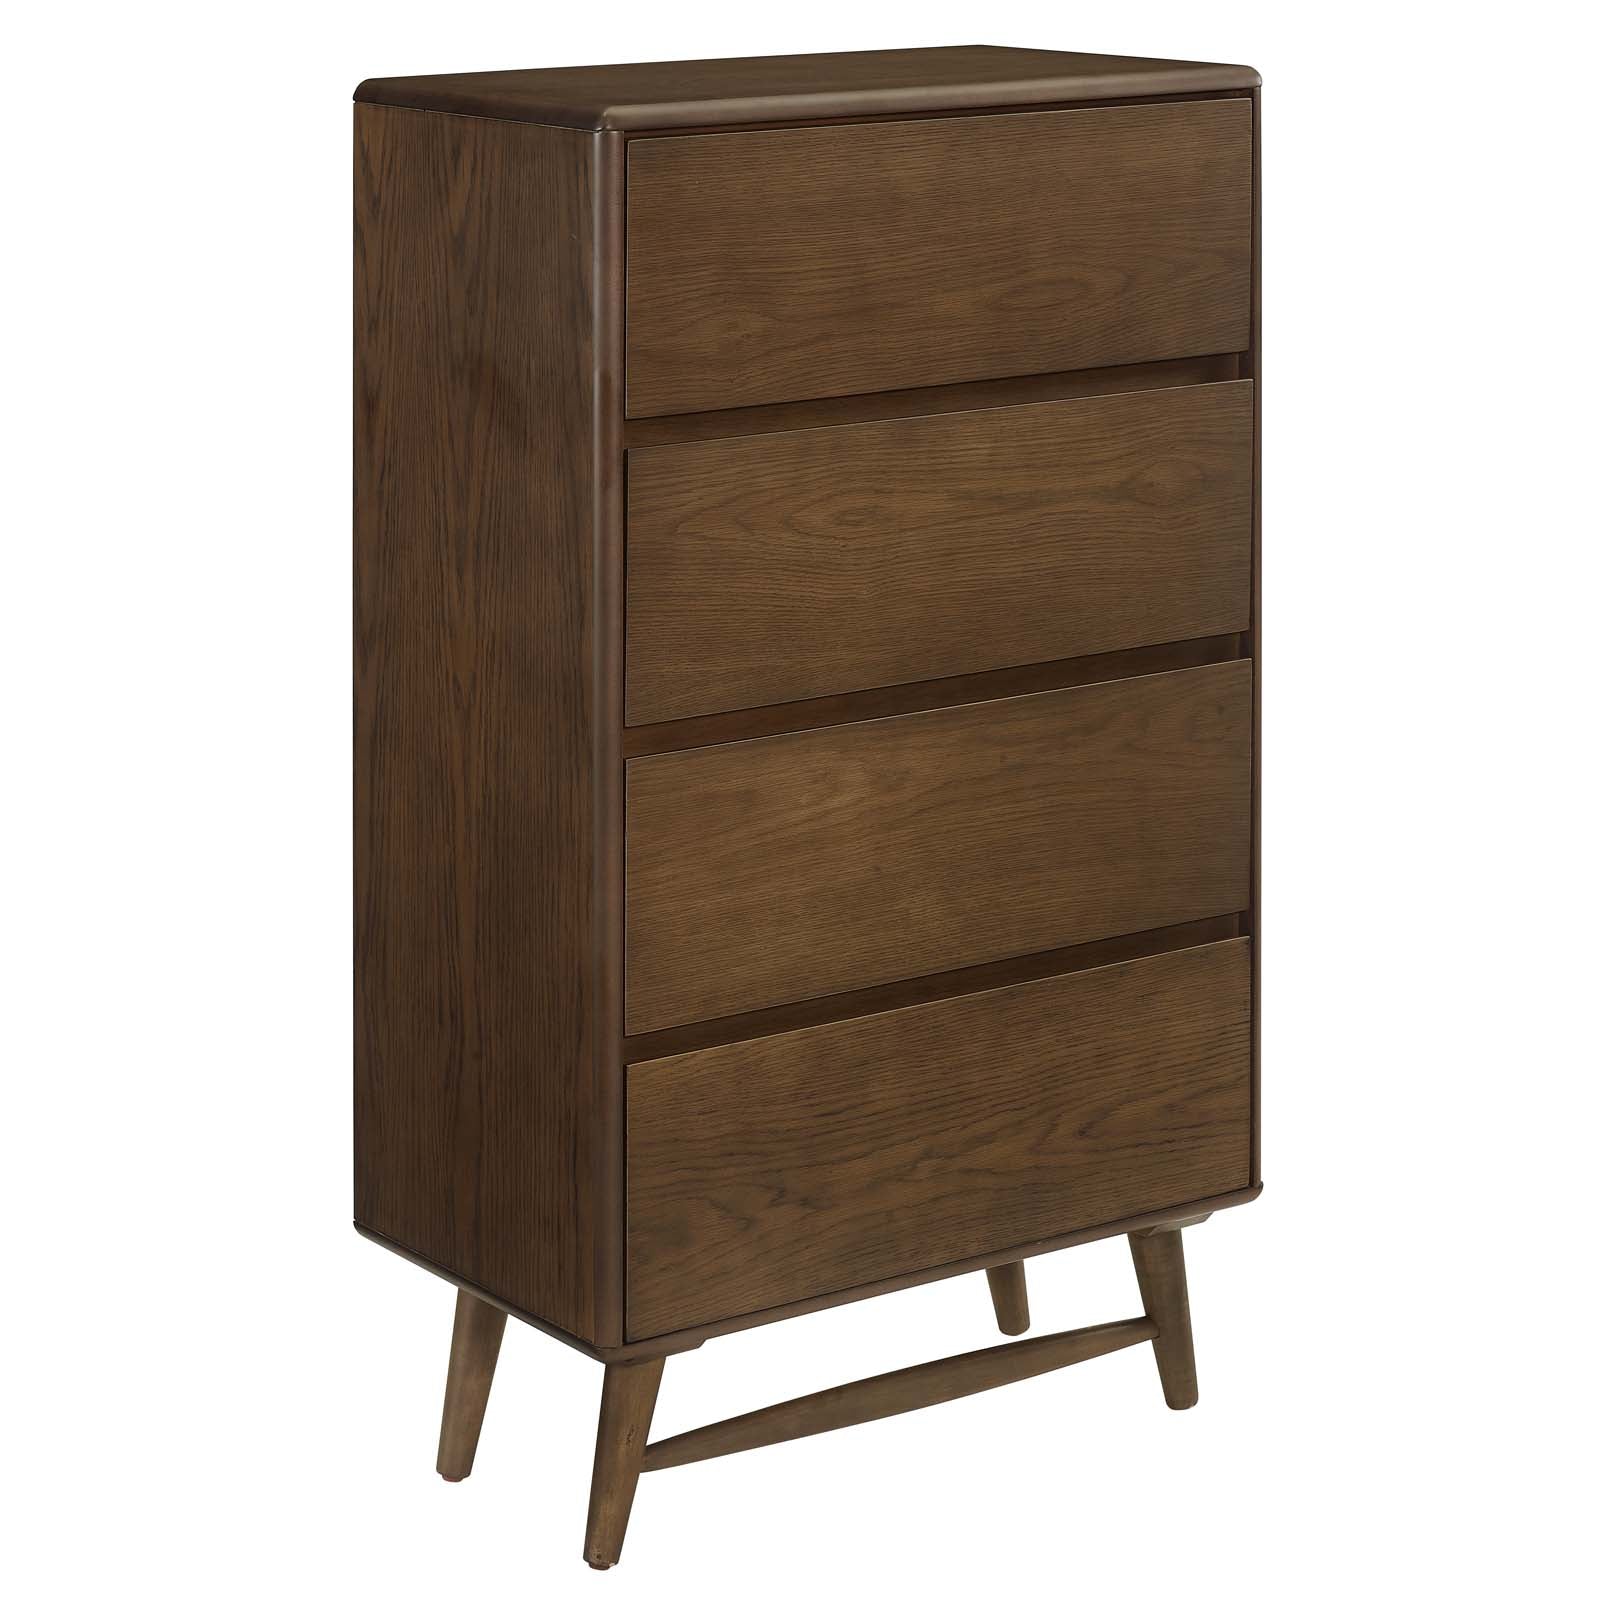 Modway Chest of Drawers - Talwyn Wood Chest Chestnut